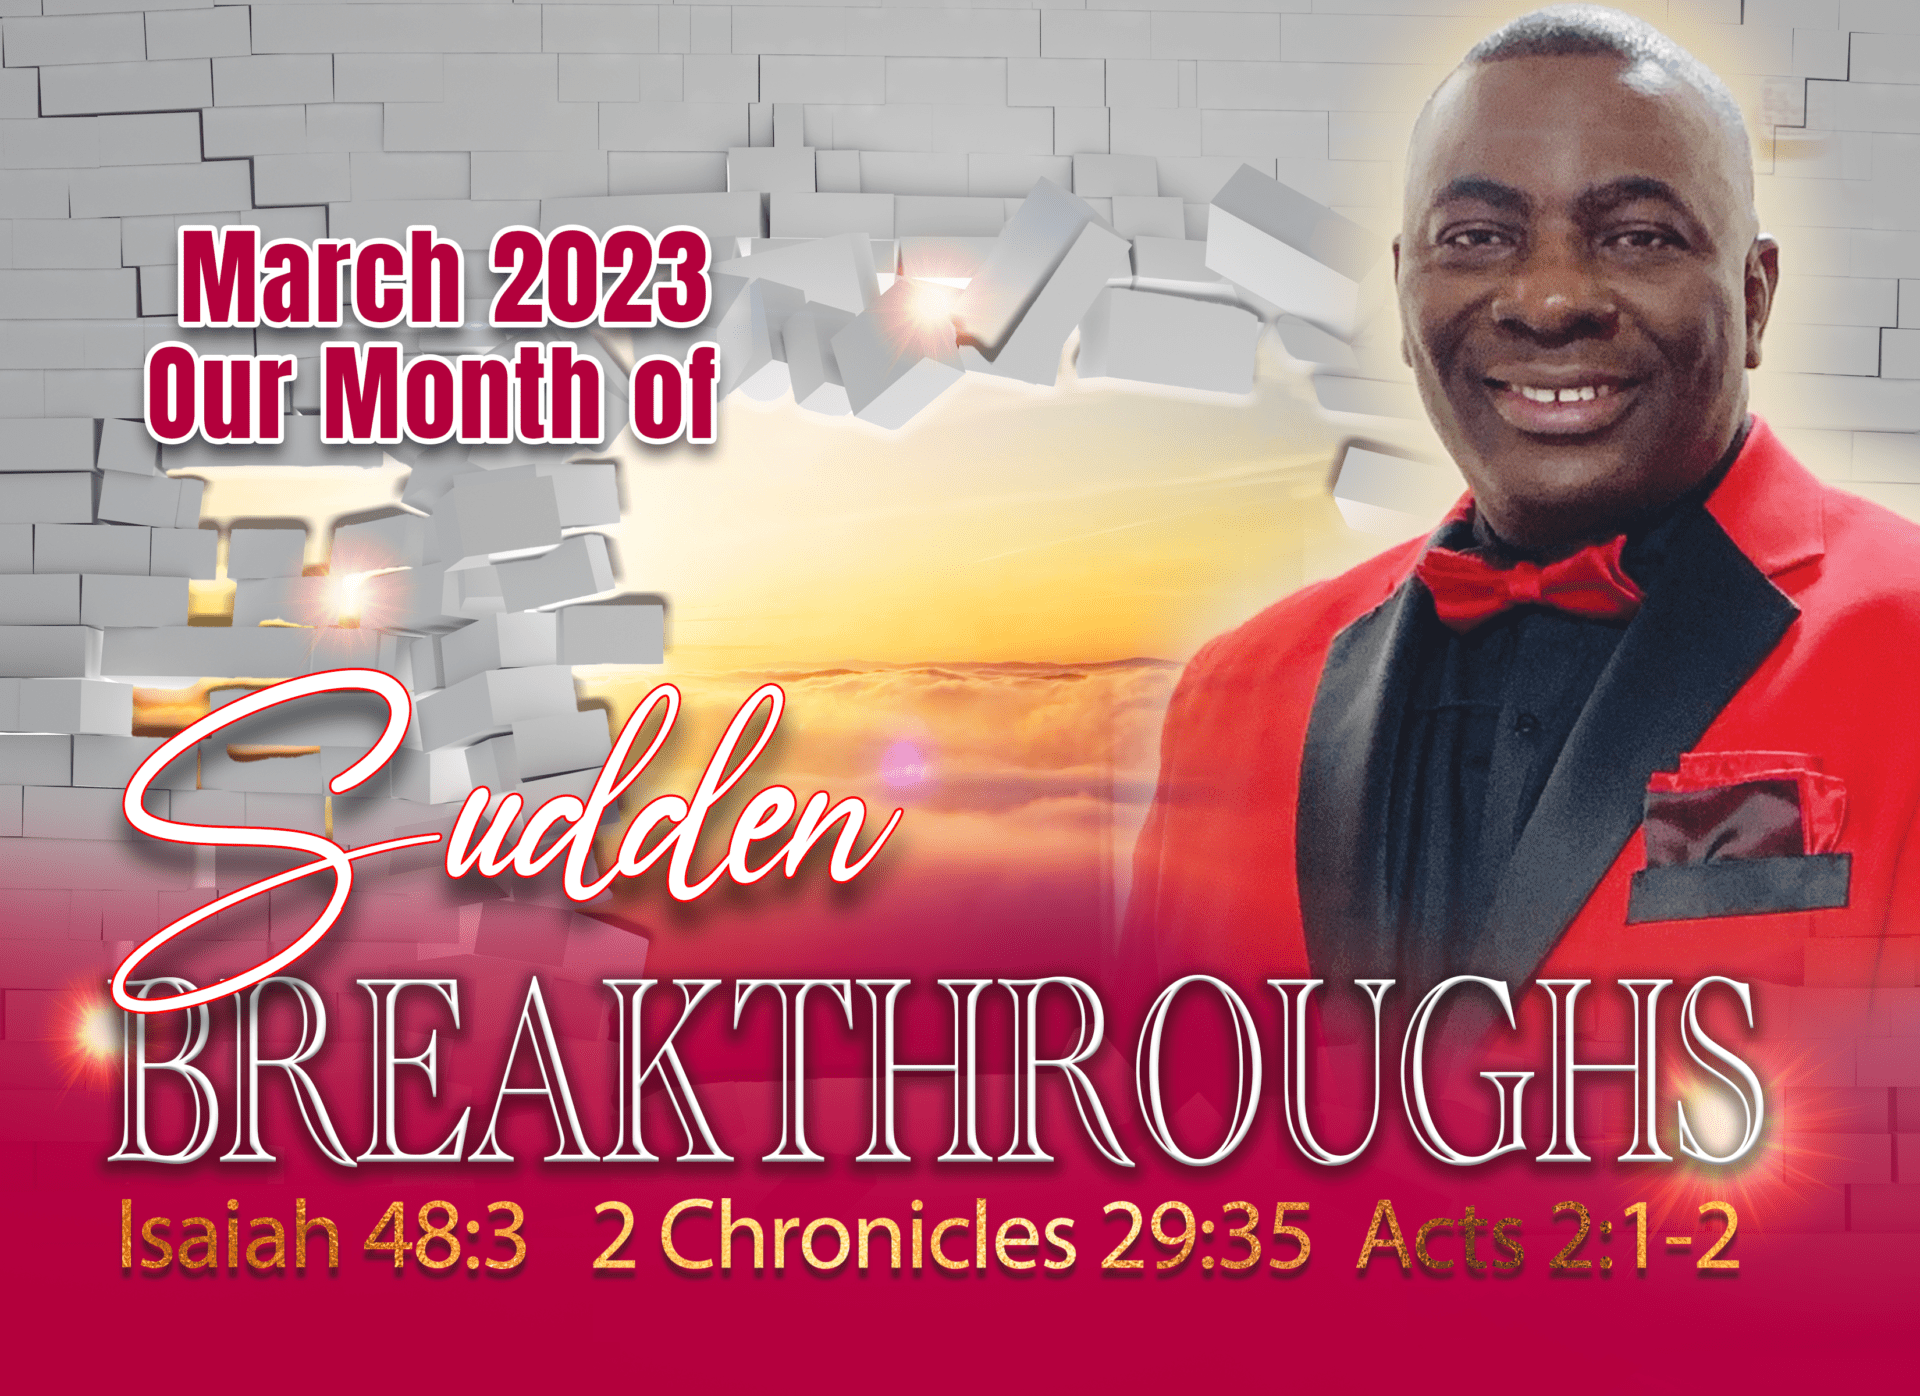 You are currently viewing Our Month of SUDDEN BREAKTHROUGHS